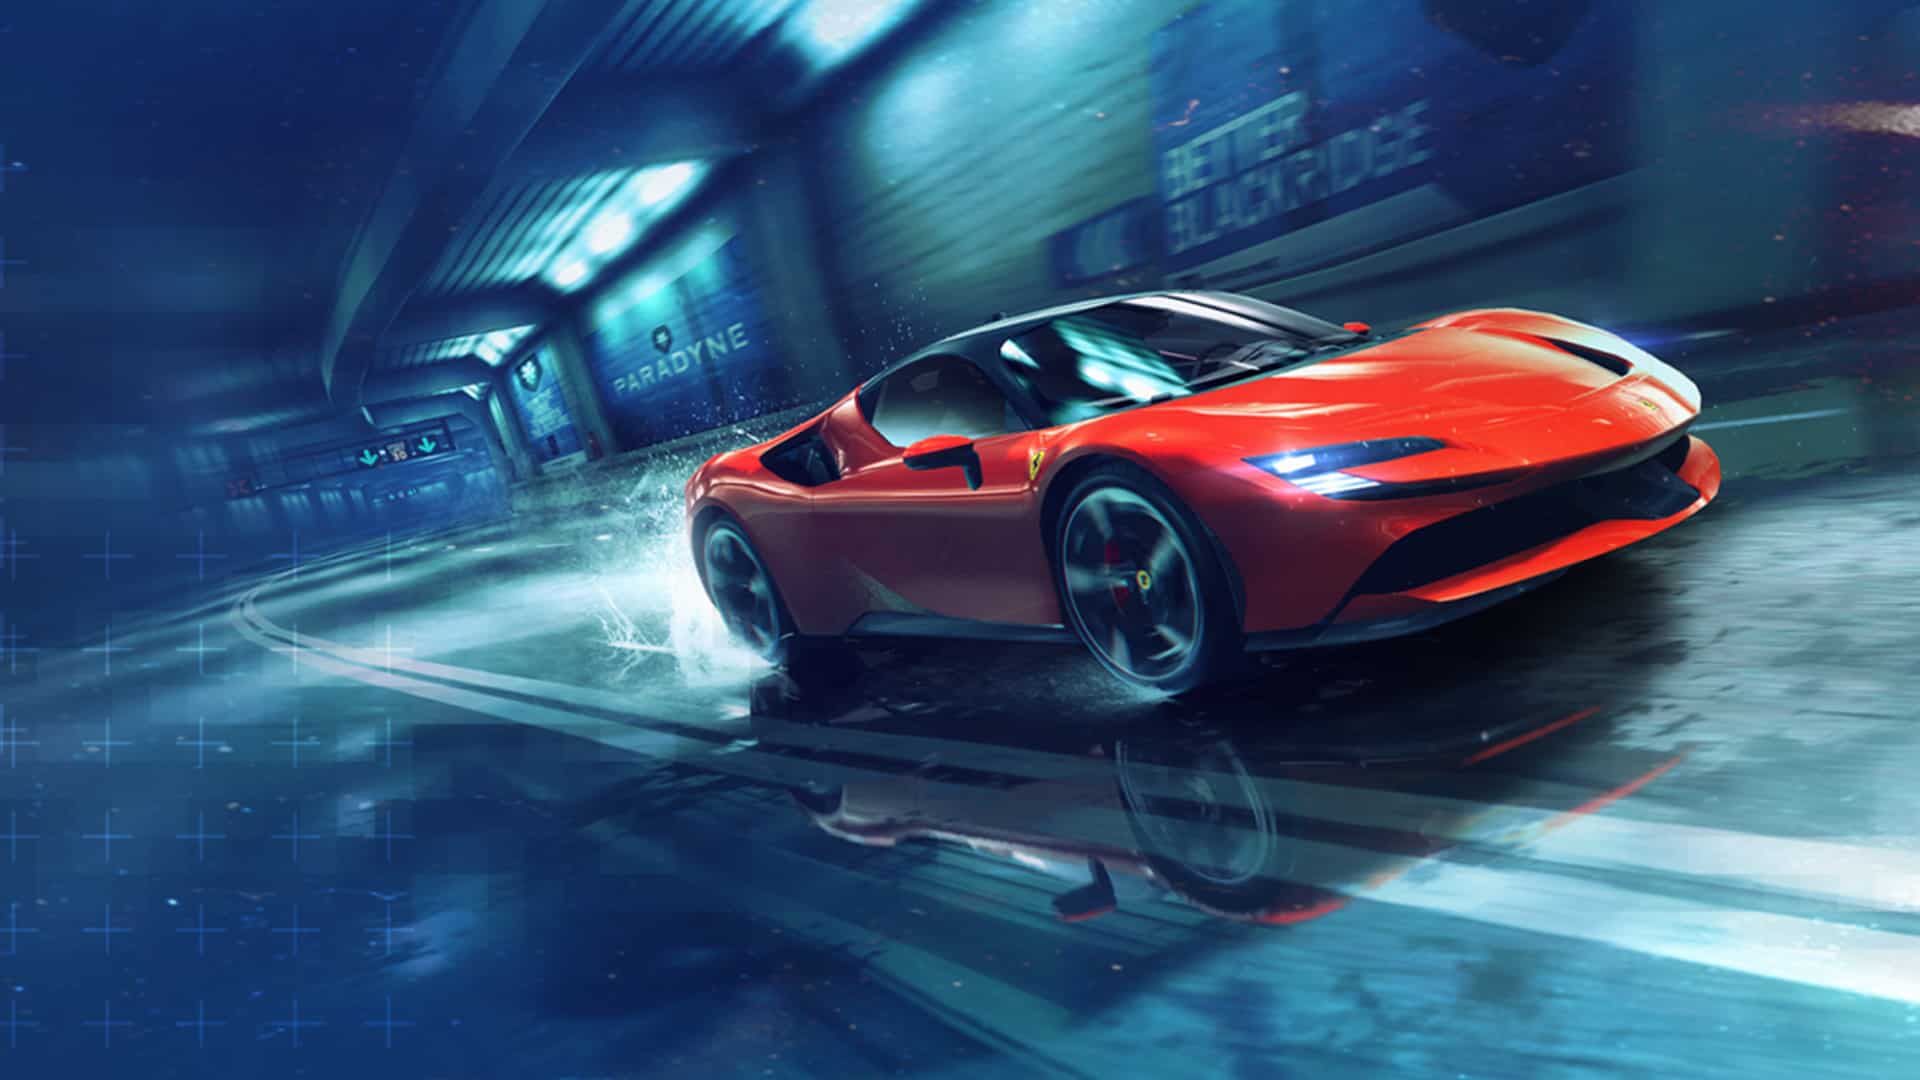 Need For Speed: No Limits Wallpapers